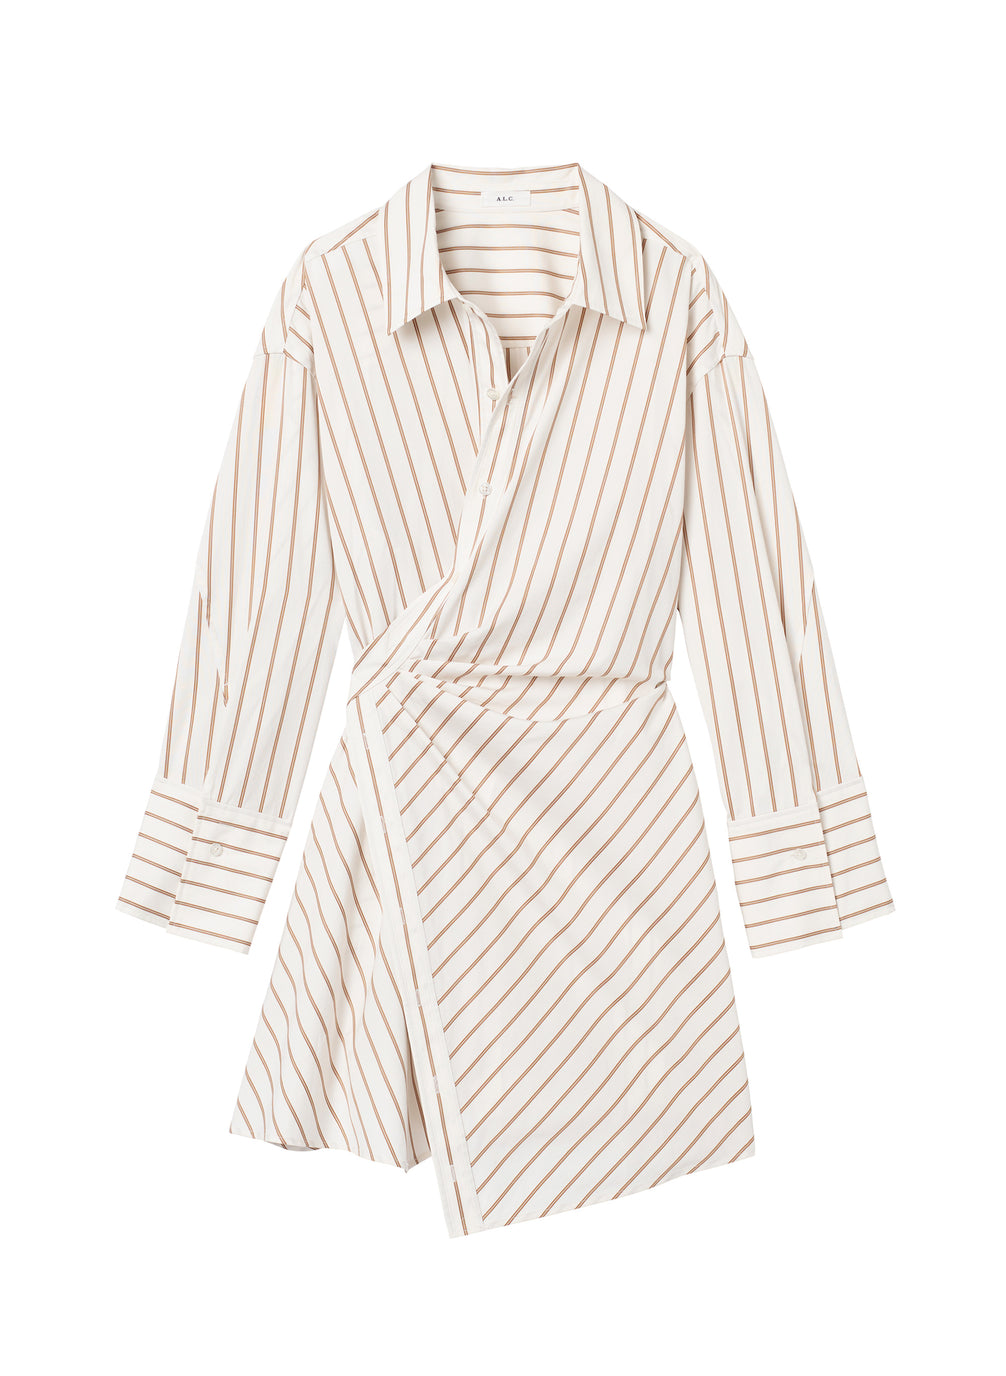 flatlay of cream and brown striped shirtdress